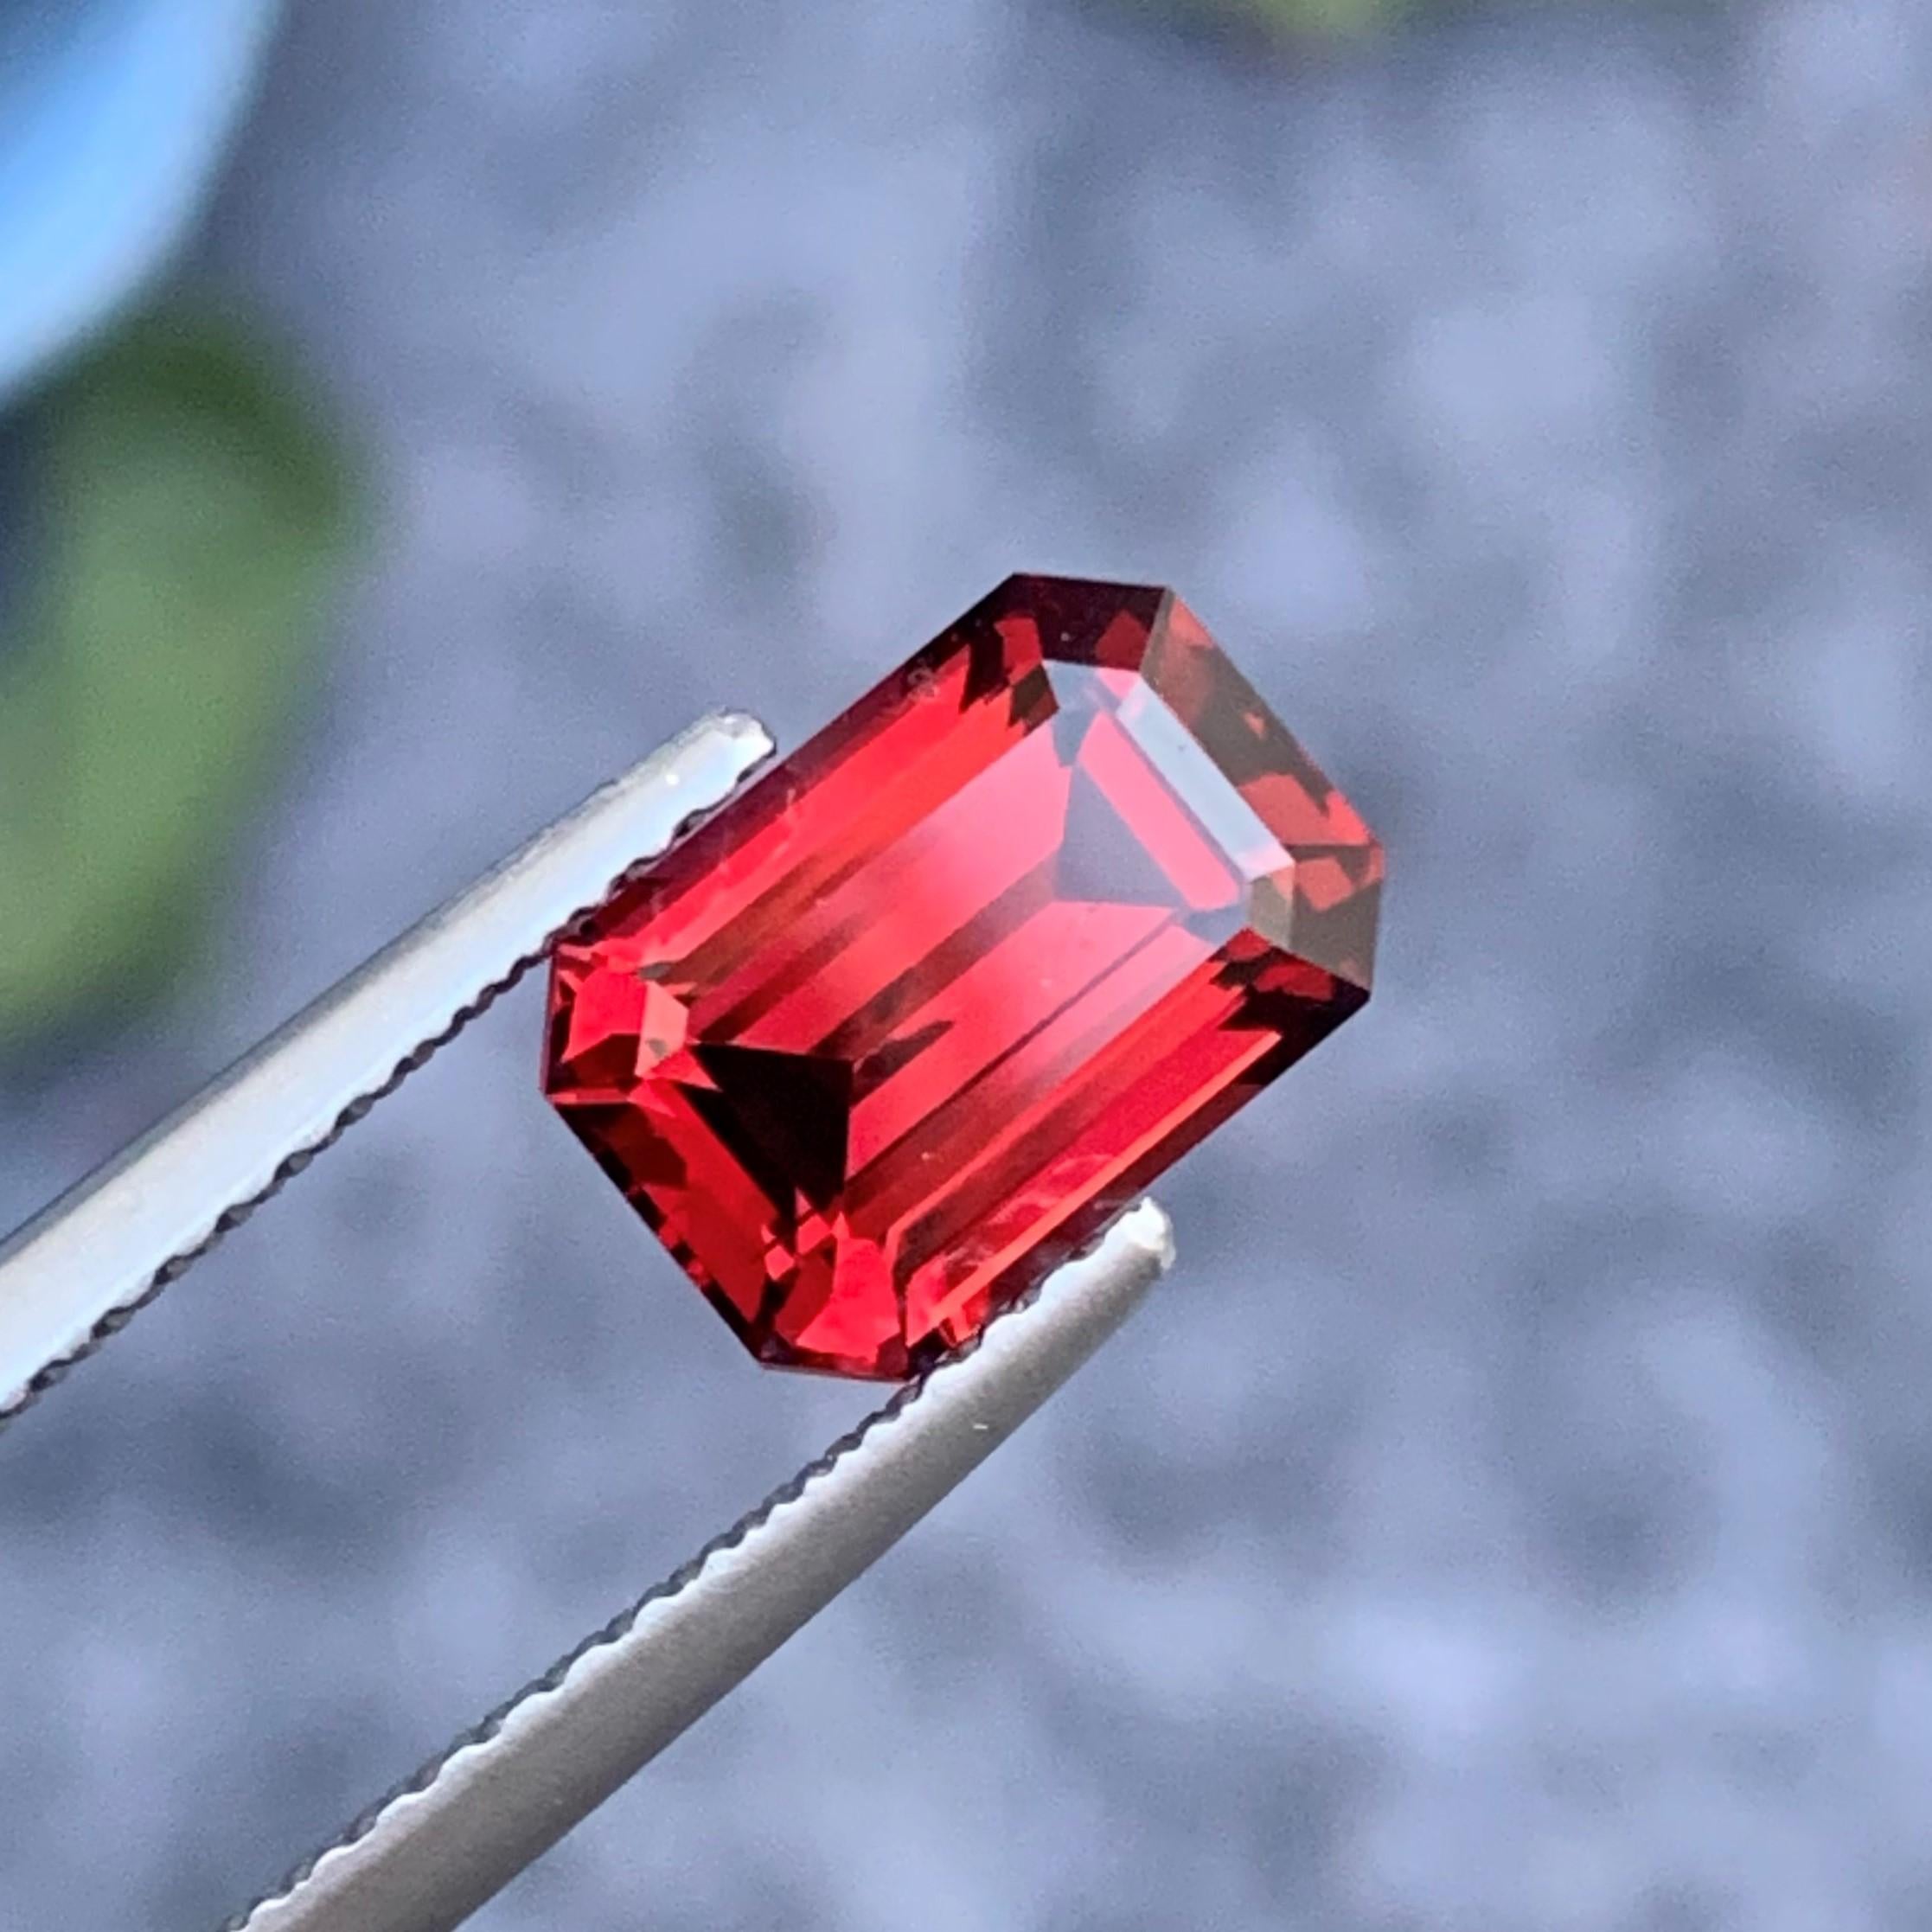 Loose Rhodolite Garnet
Weight : 2.45 Carats
Dimensions : 8.6x6x4.6 Mm
Origin : Tanzania Africa
Clarity : AAA Eye Clean
Shape: Emerald Shape
Certificate: On Demand
Treatment: Non
Color: Red
.
Rhodolite is a mixture of pyrope and almandite garnets.